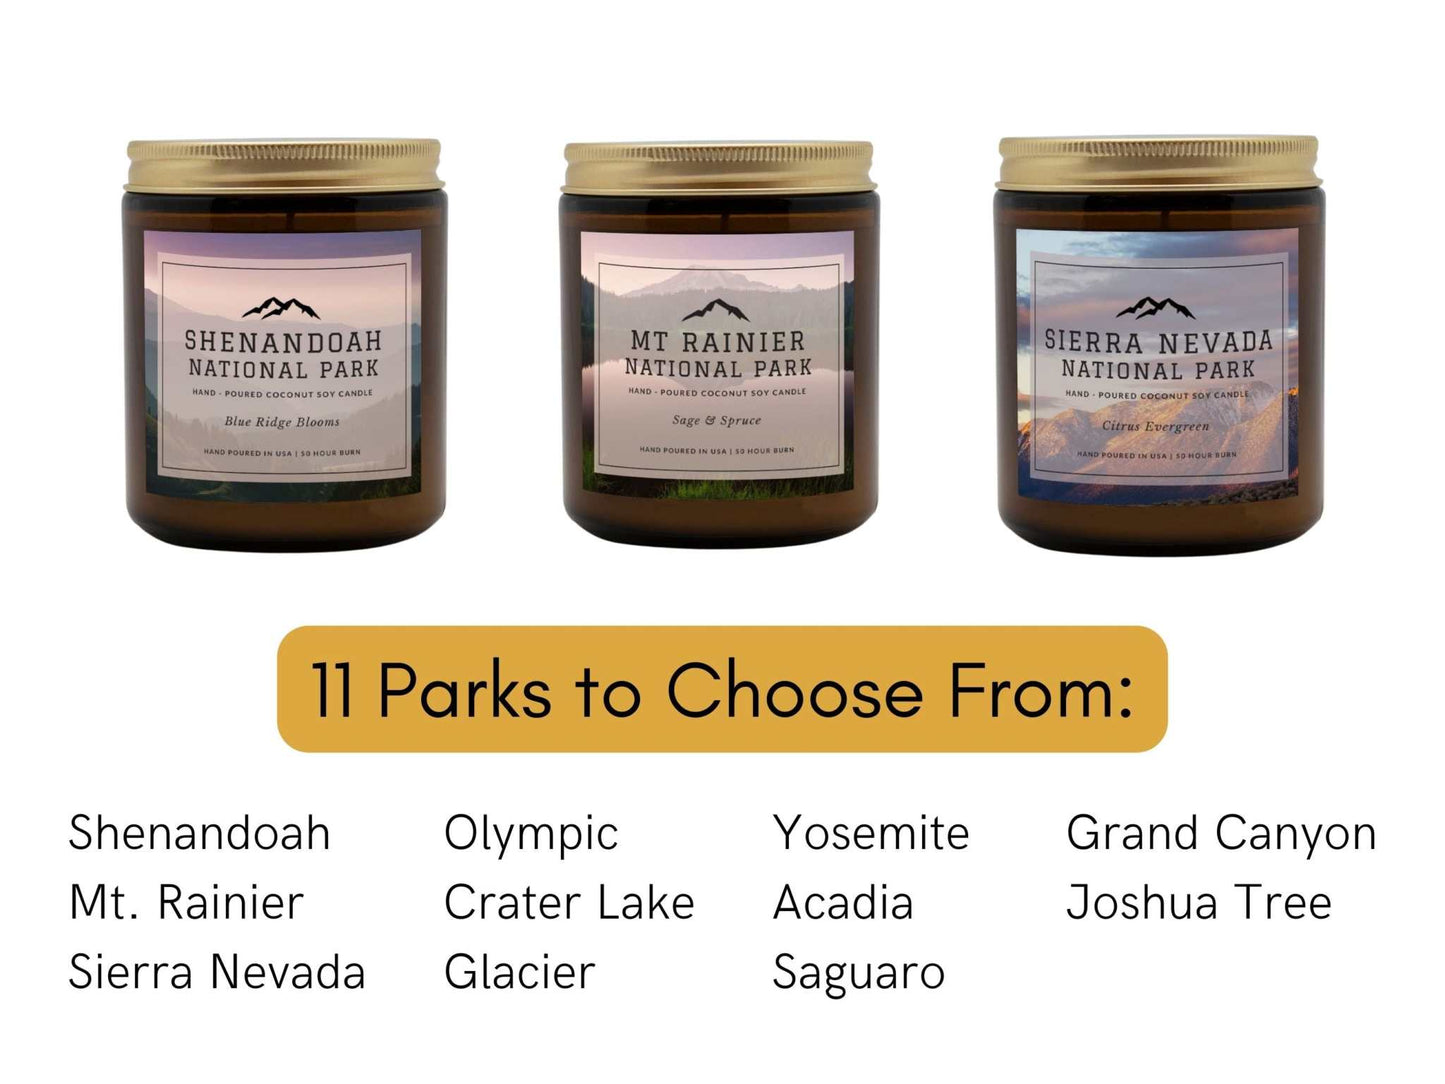 Yosemite National Park Lemon Evergreen CandleBring home the smell of the most beautiful places on earth, with these 9 oz coconut soy wax hand-poured National Park candles. These National Park Amber Jar Candles 